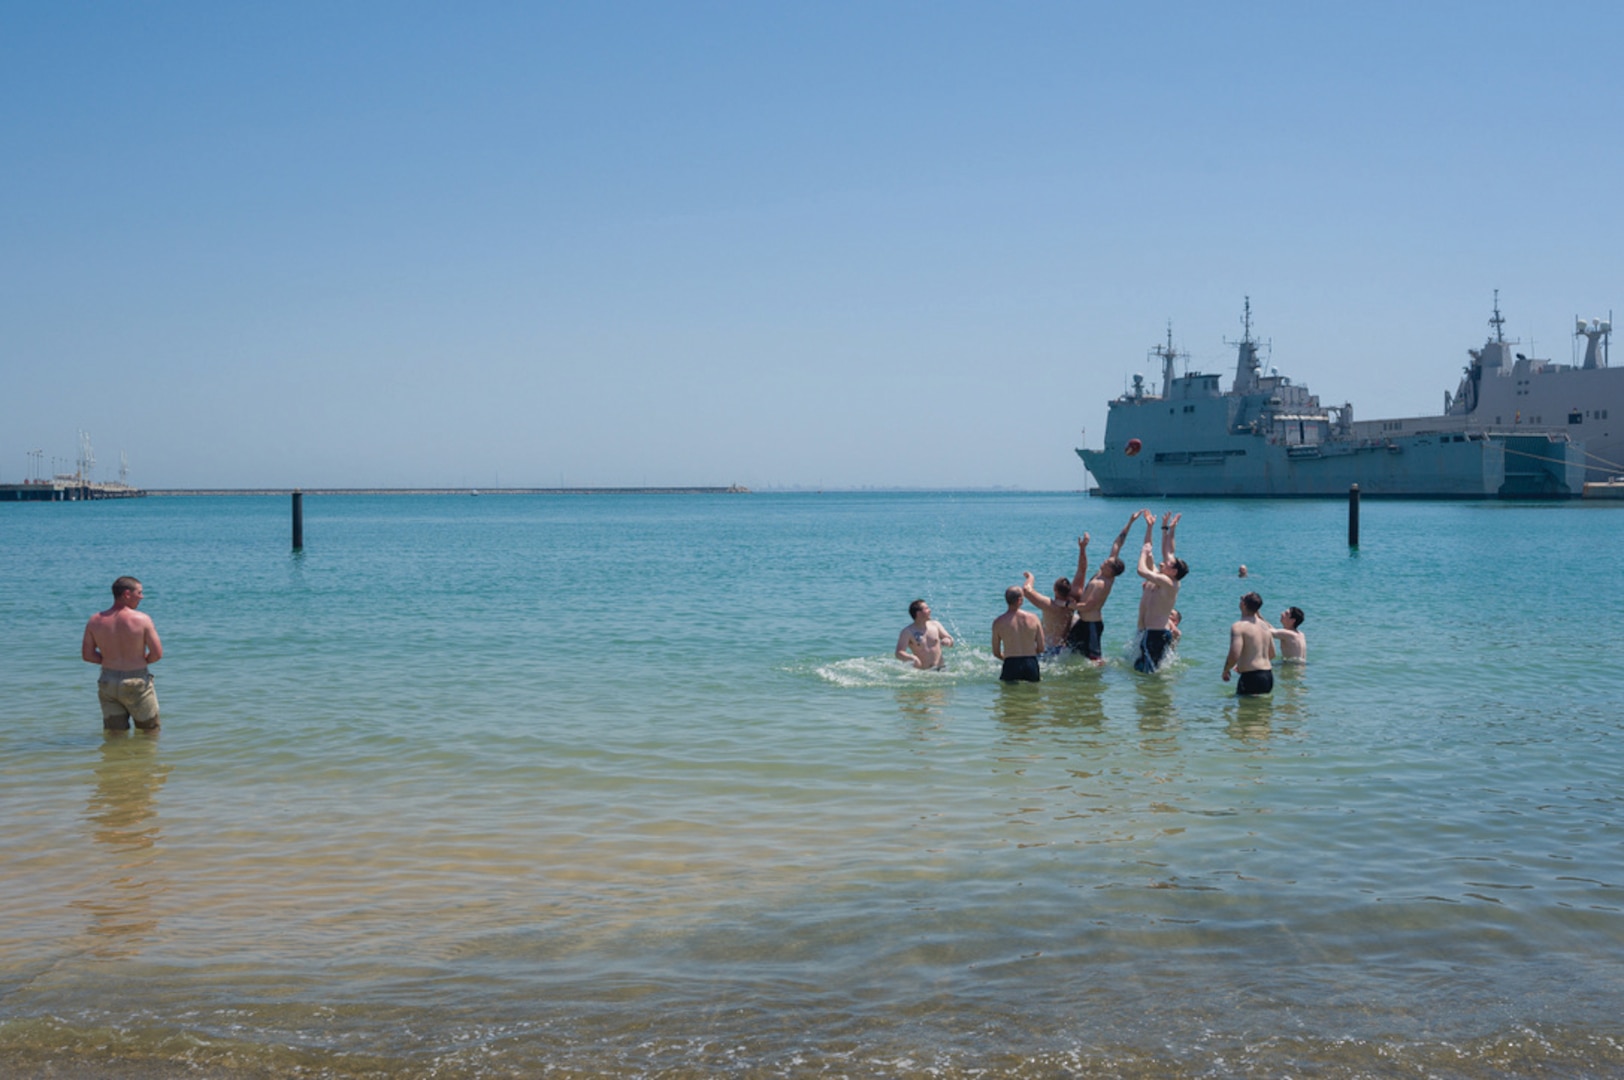 Men splash around on a beach with a Navy ship in the background.